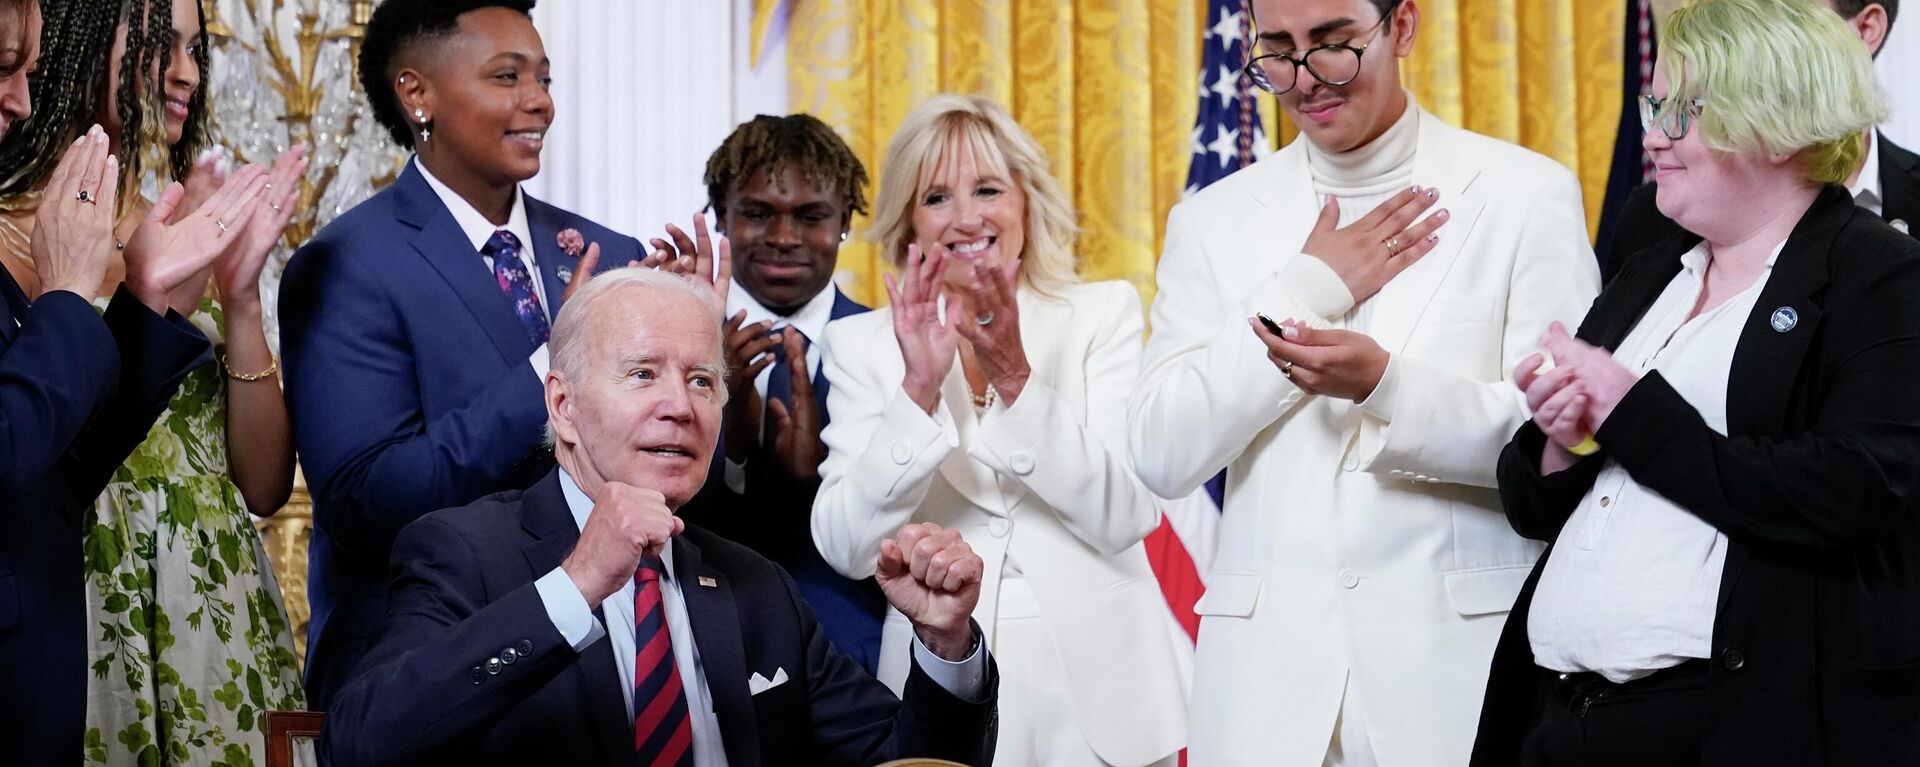 President Joe Biden celebrates after signing an executive order at an event to celebrate Pride Month in the East Room of the White House, Wednesday, June 15, 2022, in Washington. (AP Photo/Patrick Semansky) - Sputnik International, 1920, 16.06.2022